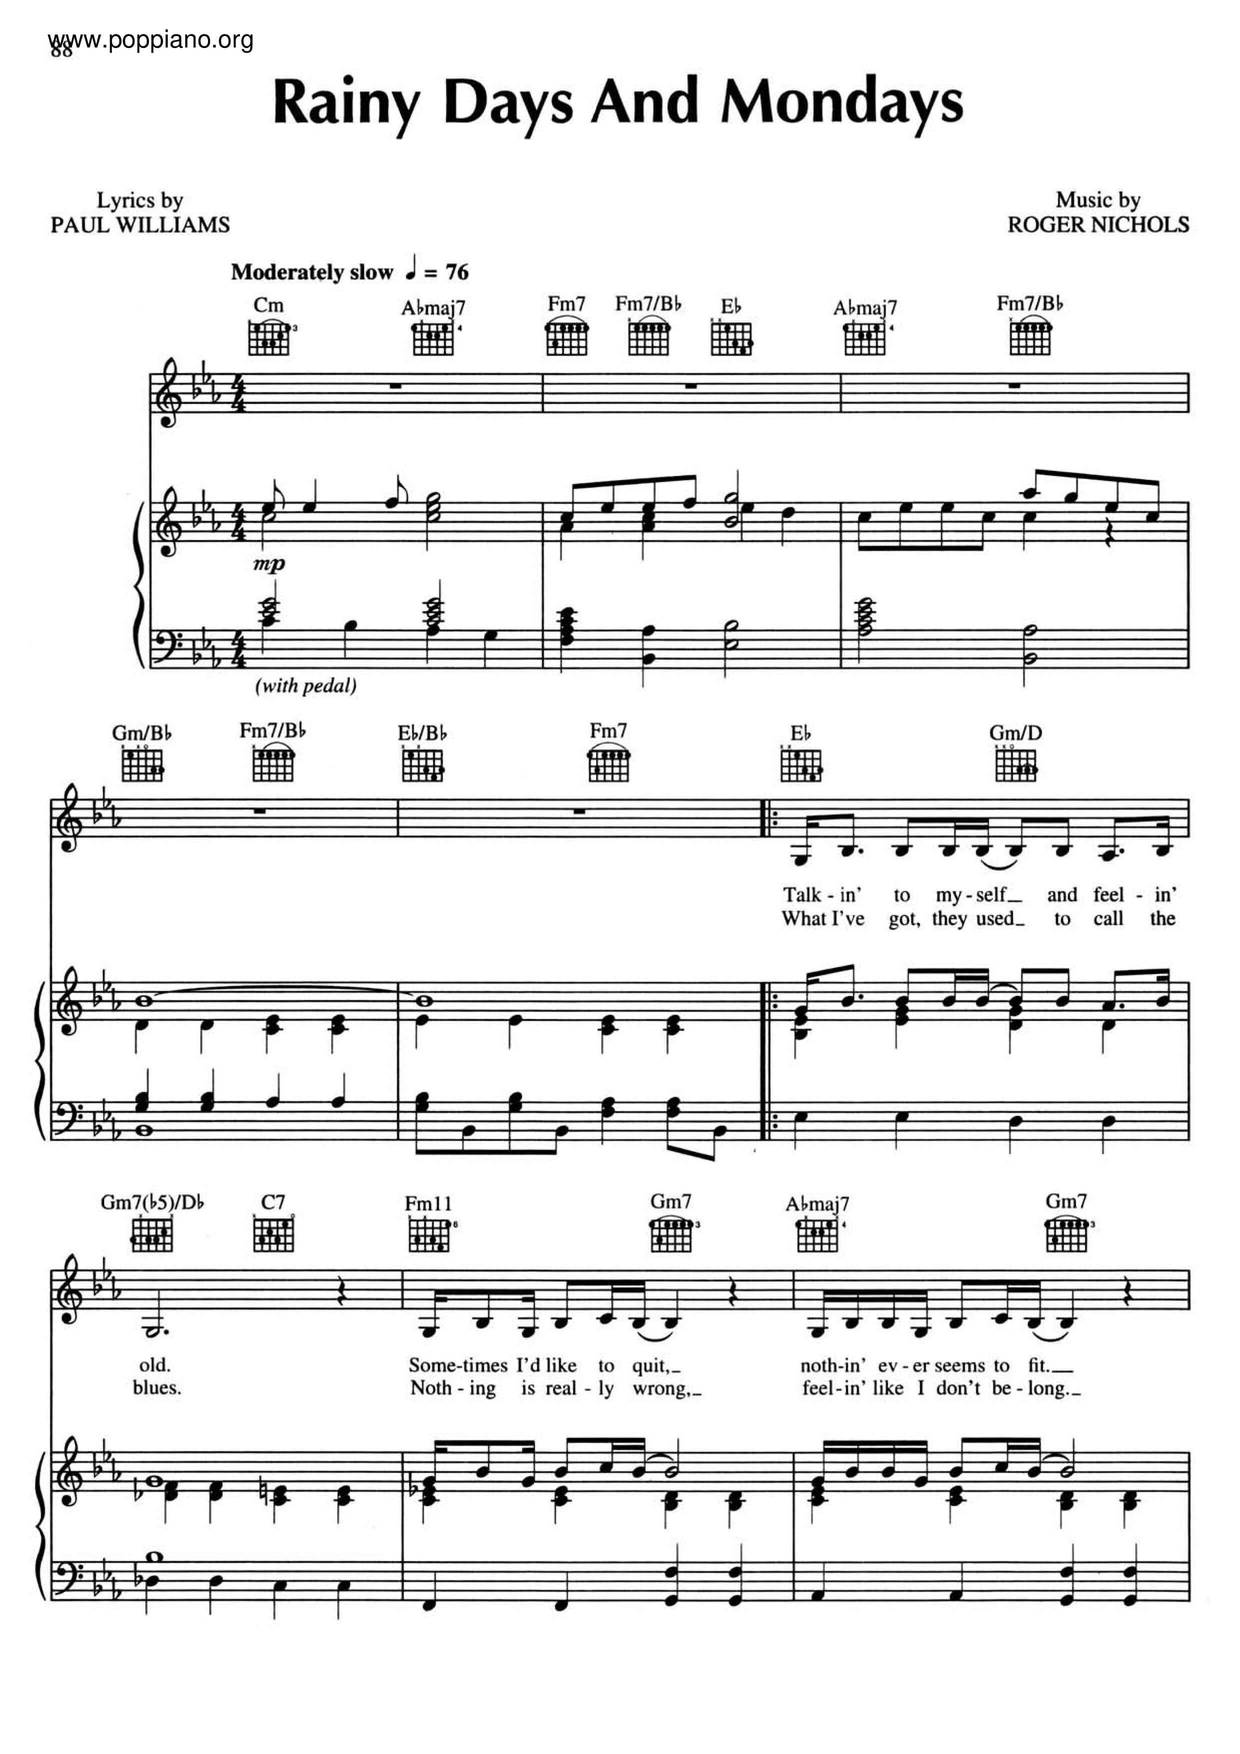 Rainy Days and Mondays" Sheet Music by The Carpenters for